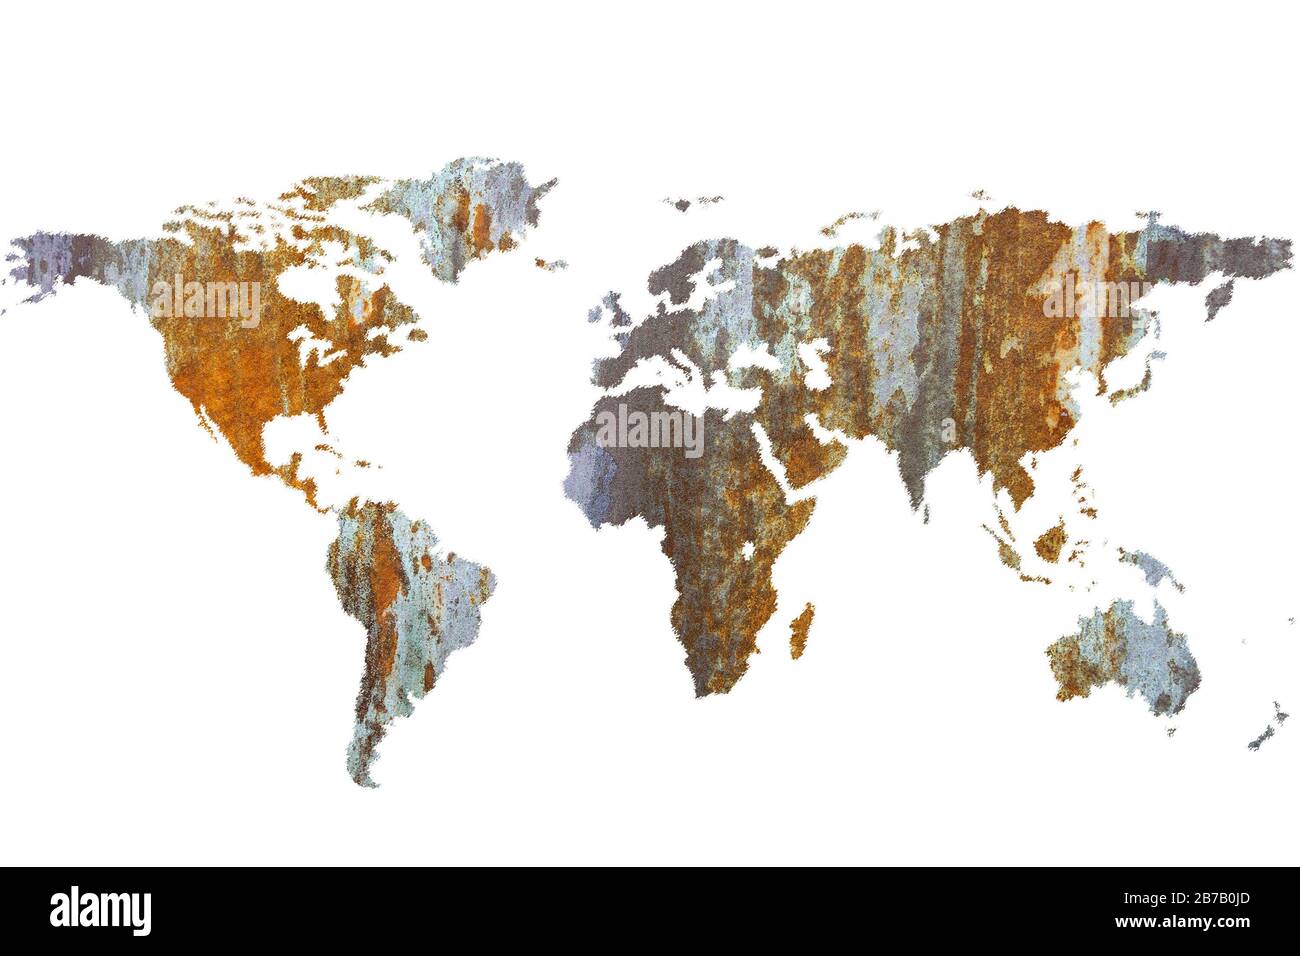 World map with an abstract texture isolated on white background Stock Photo